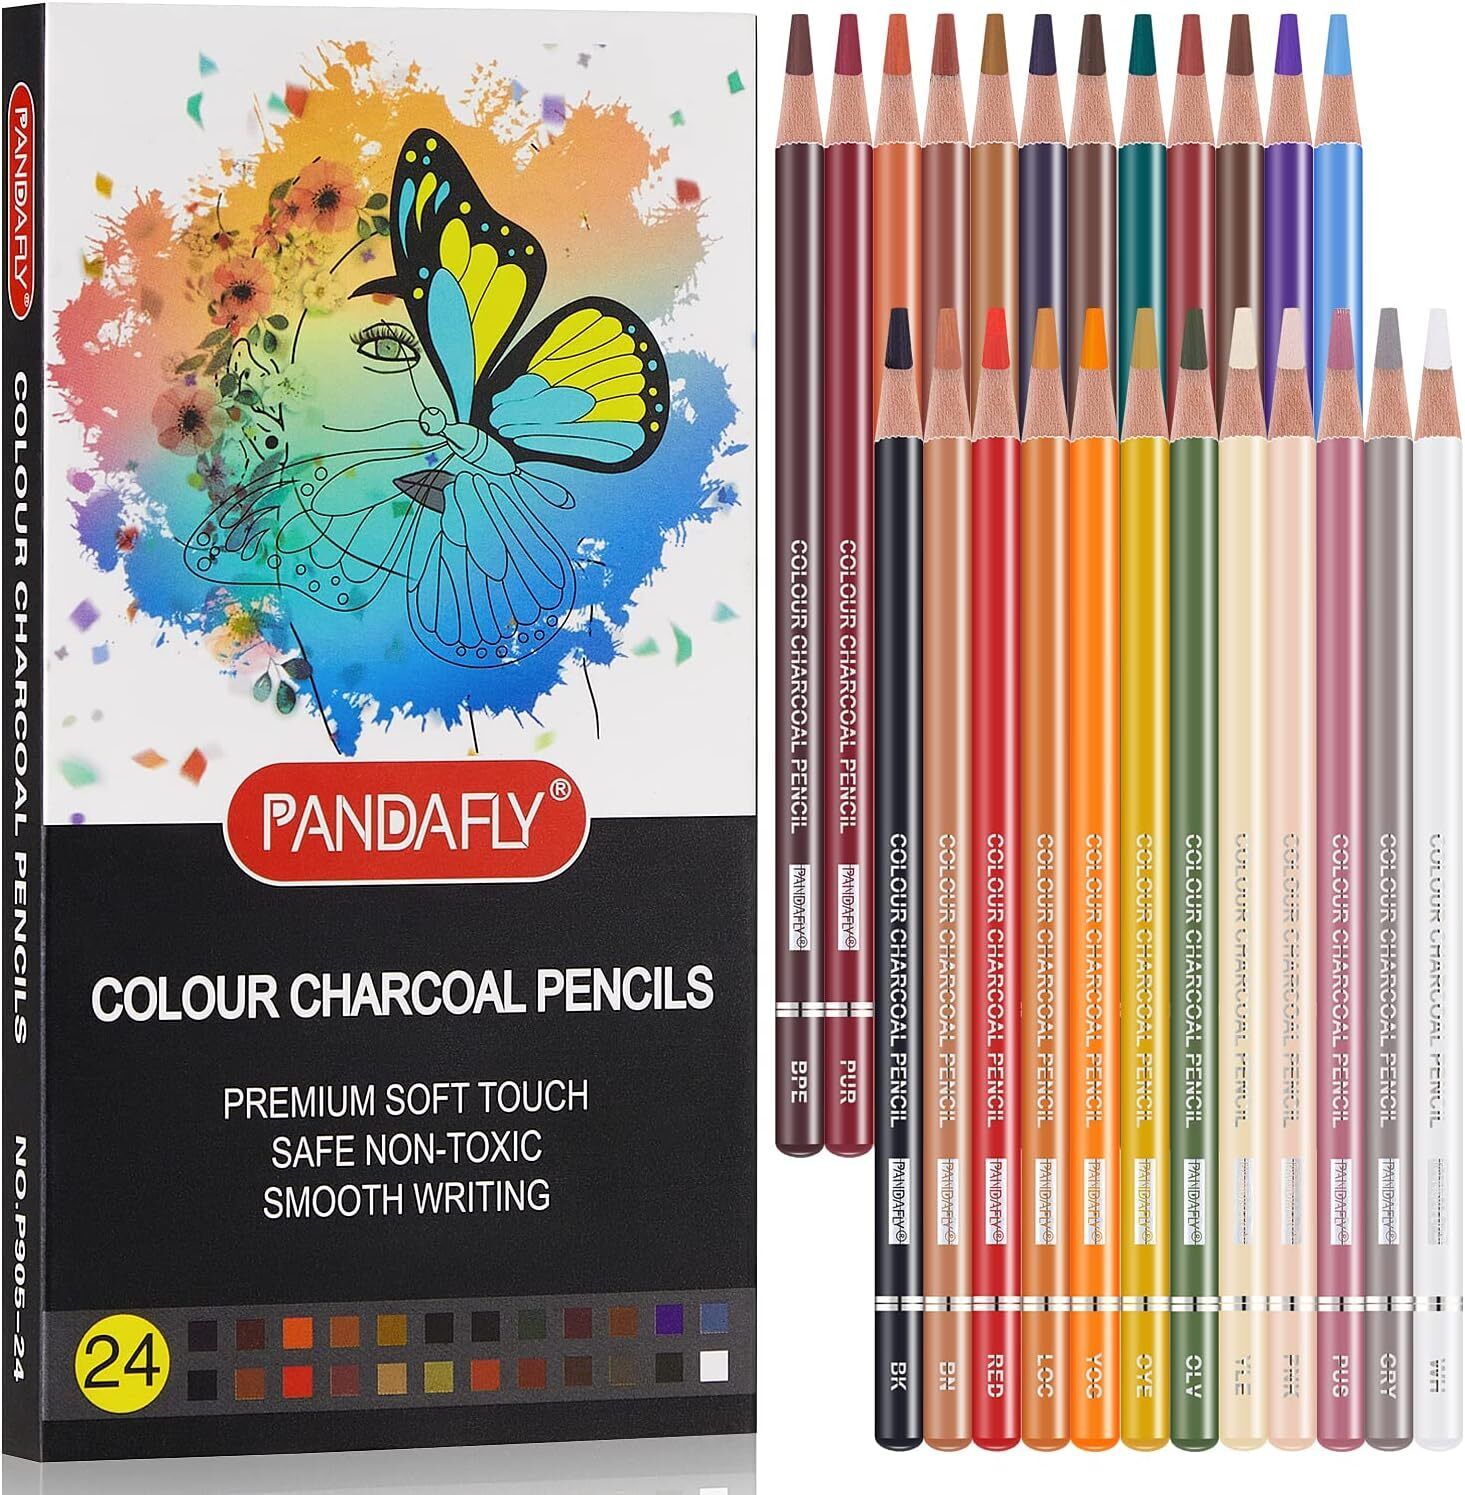 PANDAFLY Professional Colored Charcoal Pencils 1 Count (Pack of 1), 24 Colors 